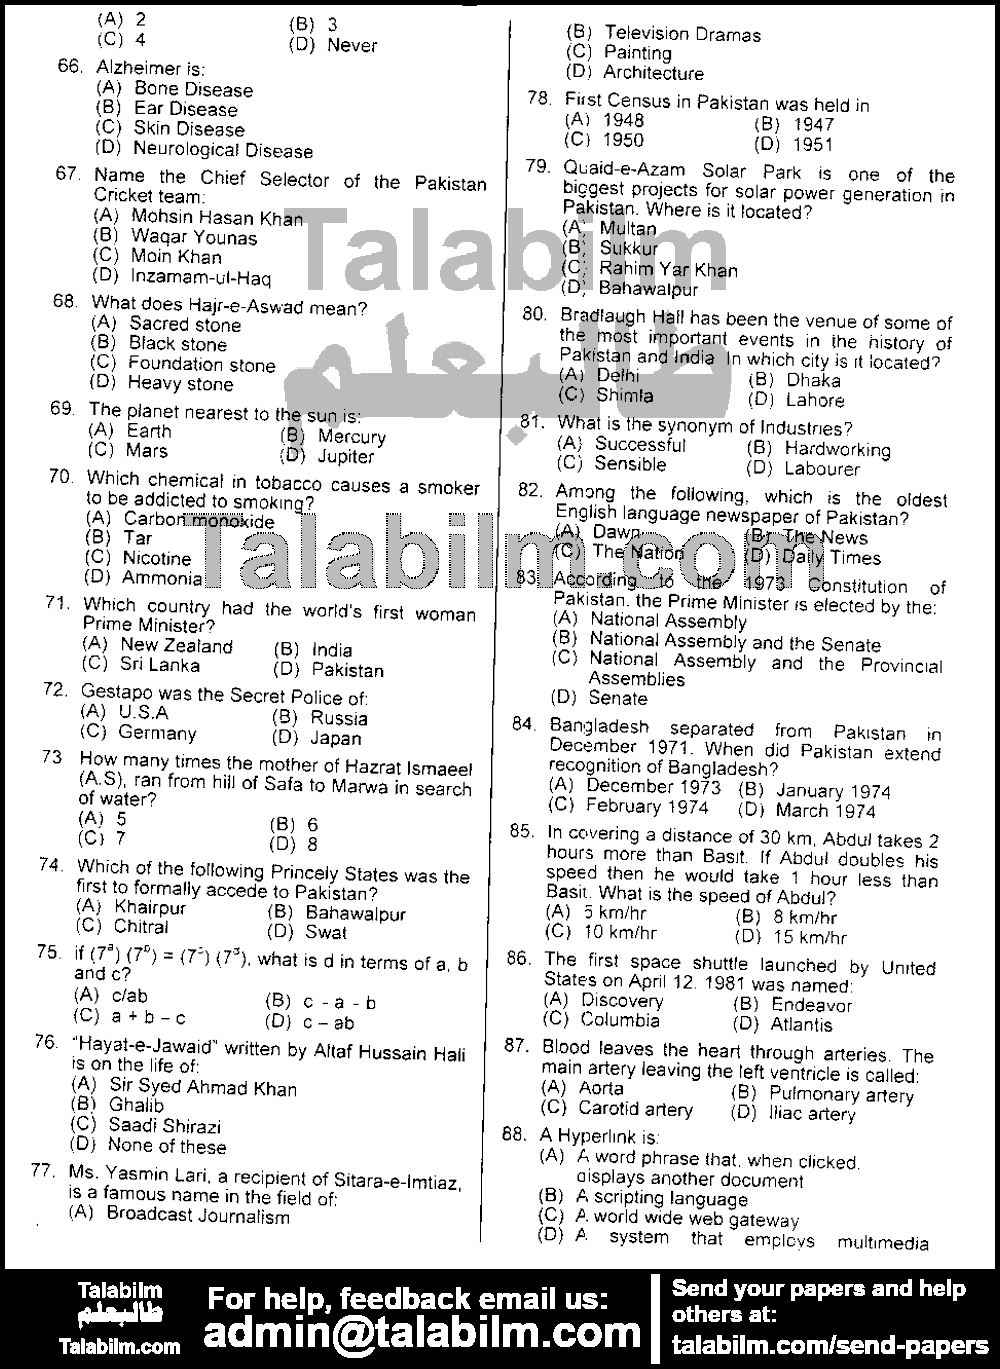 Labour Officer 0 past paper for 2018 Page No. 4